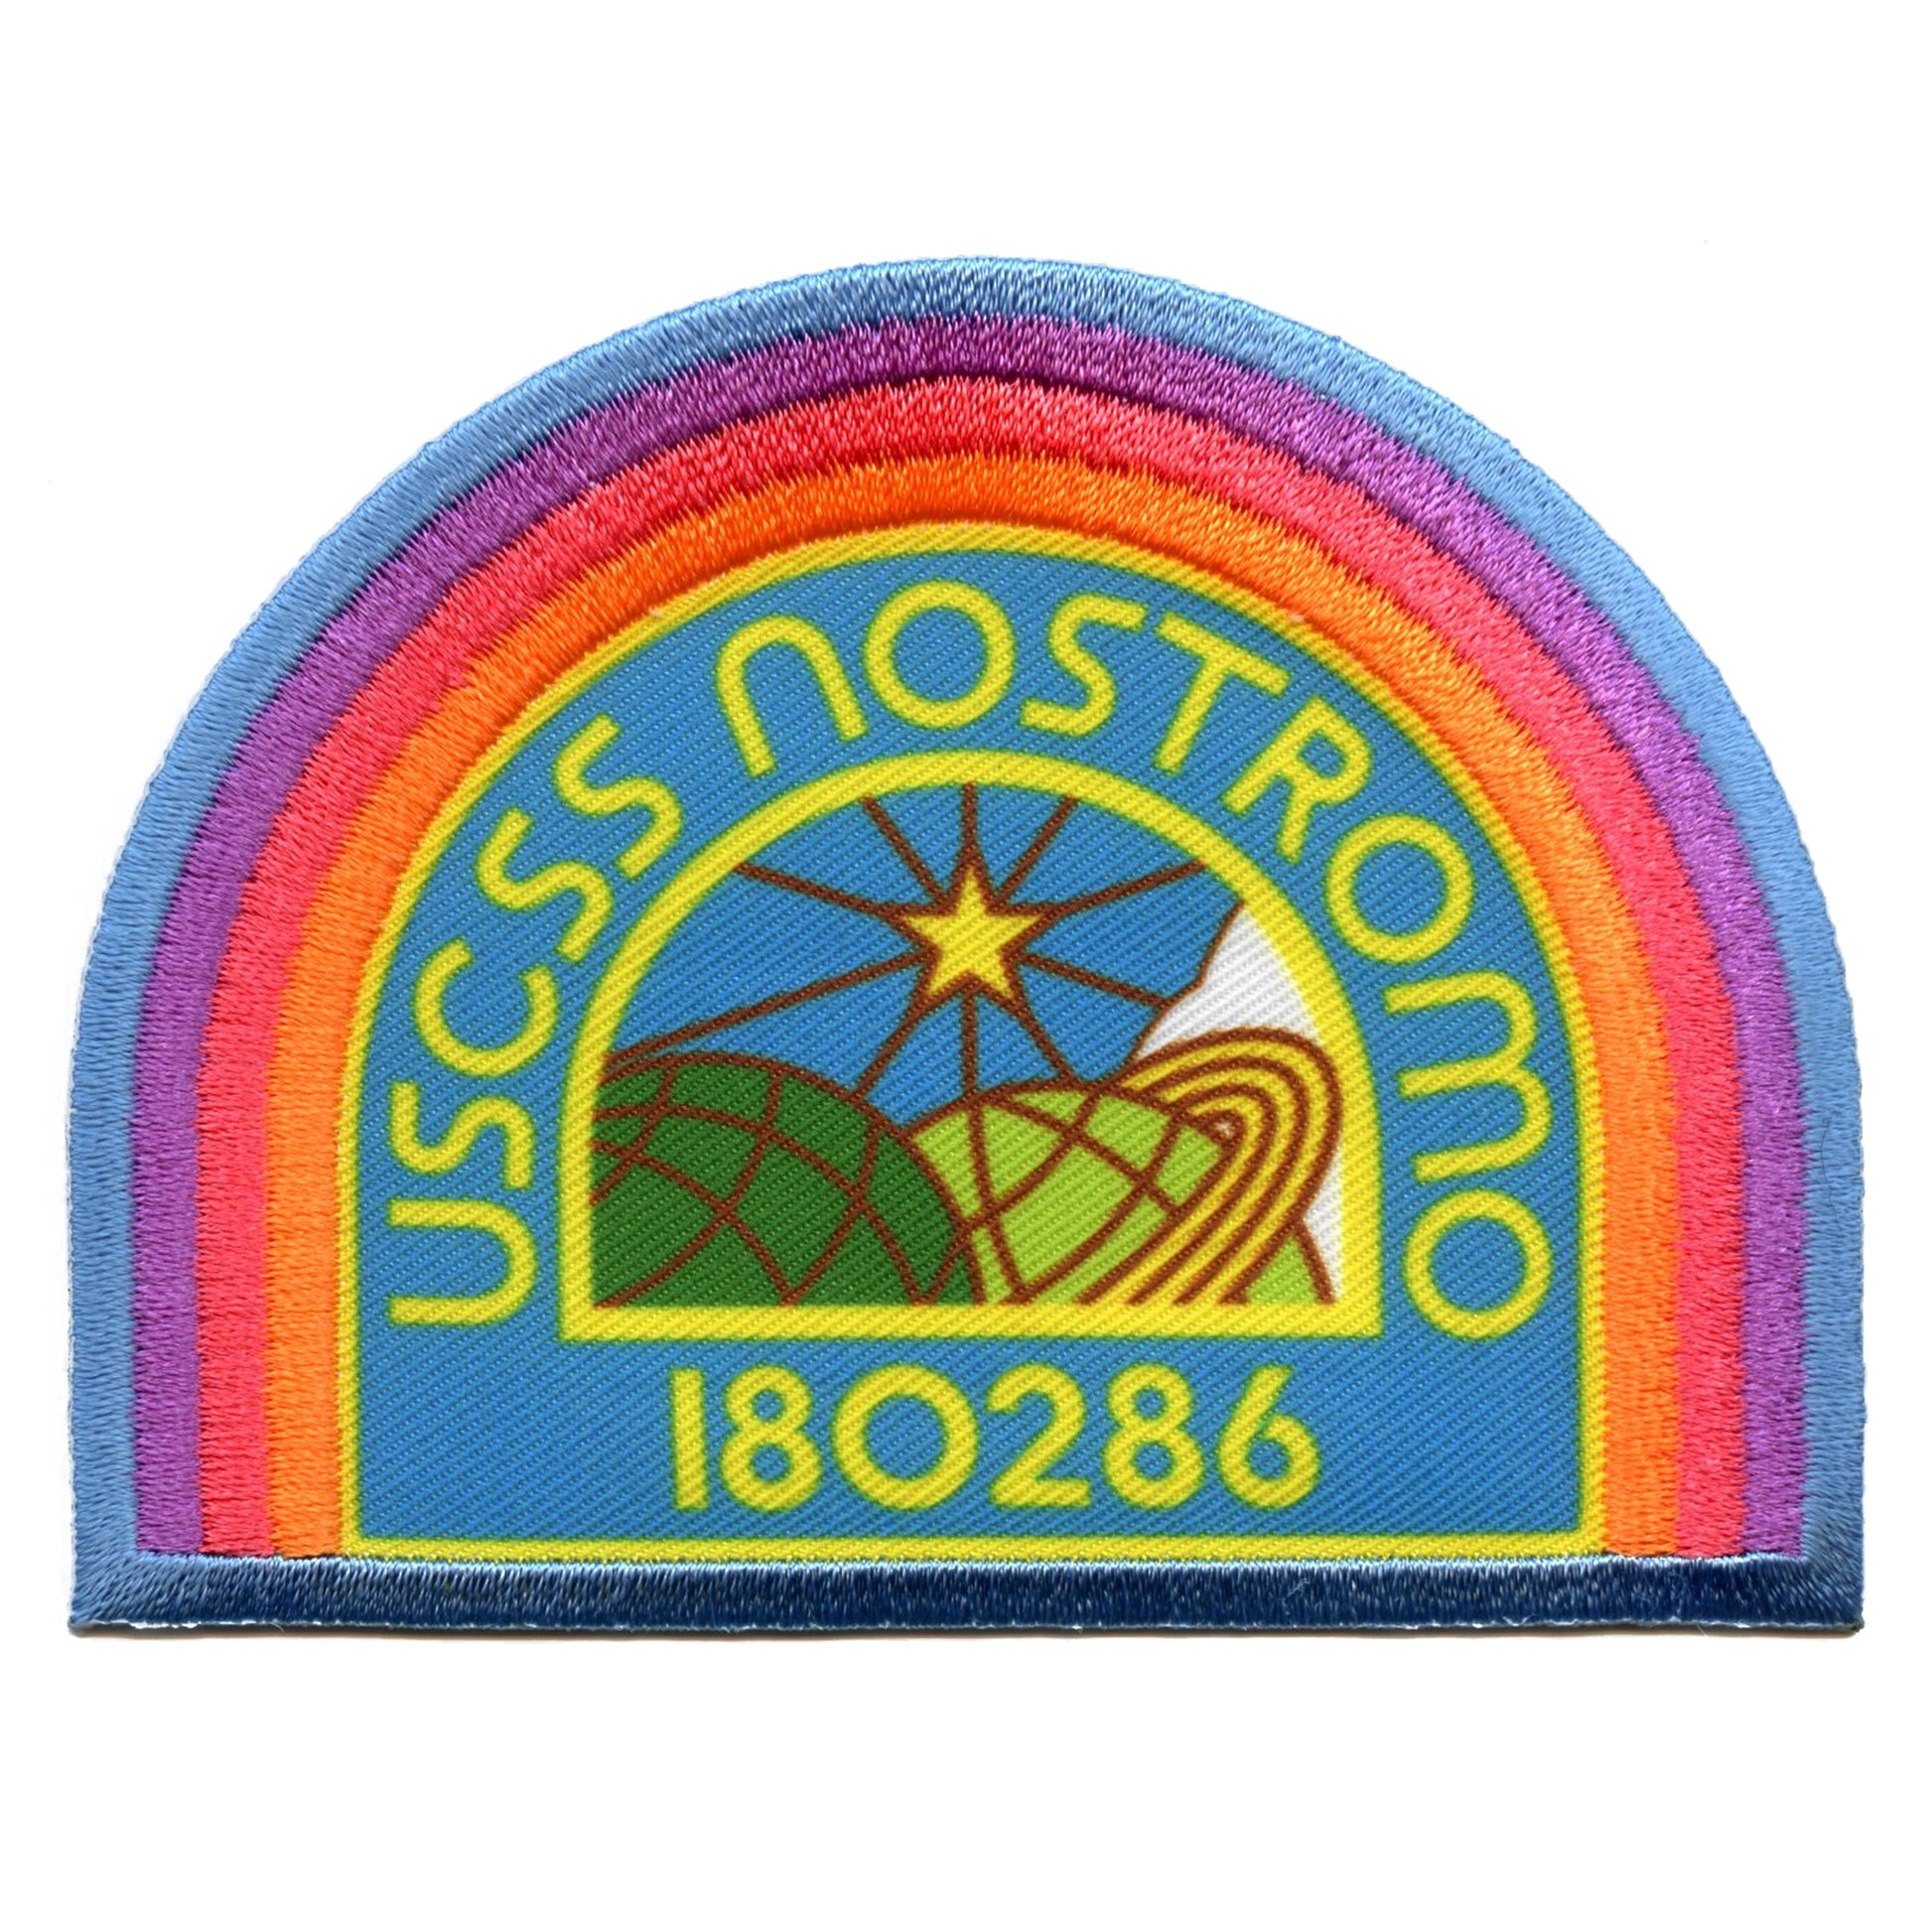 USCSS Nostromo 1809246 Alien Patch Sci-Fi Horror Movie Embroidered Iron On 